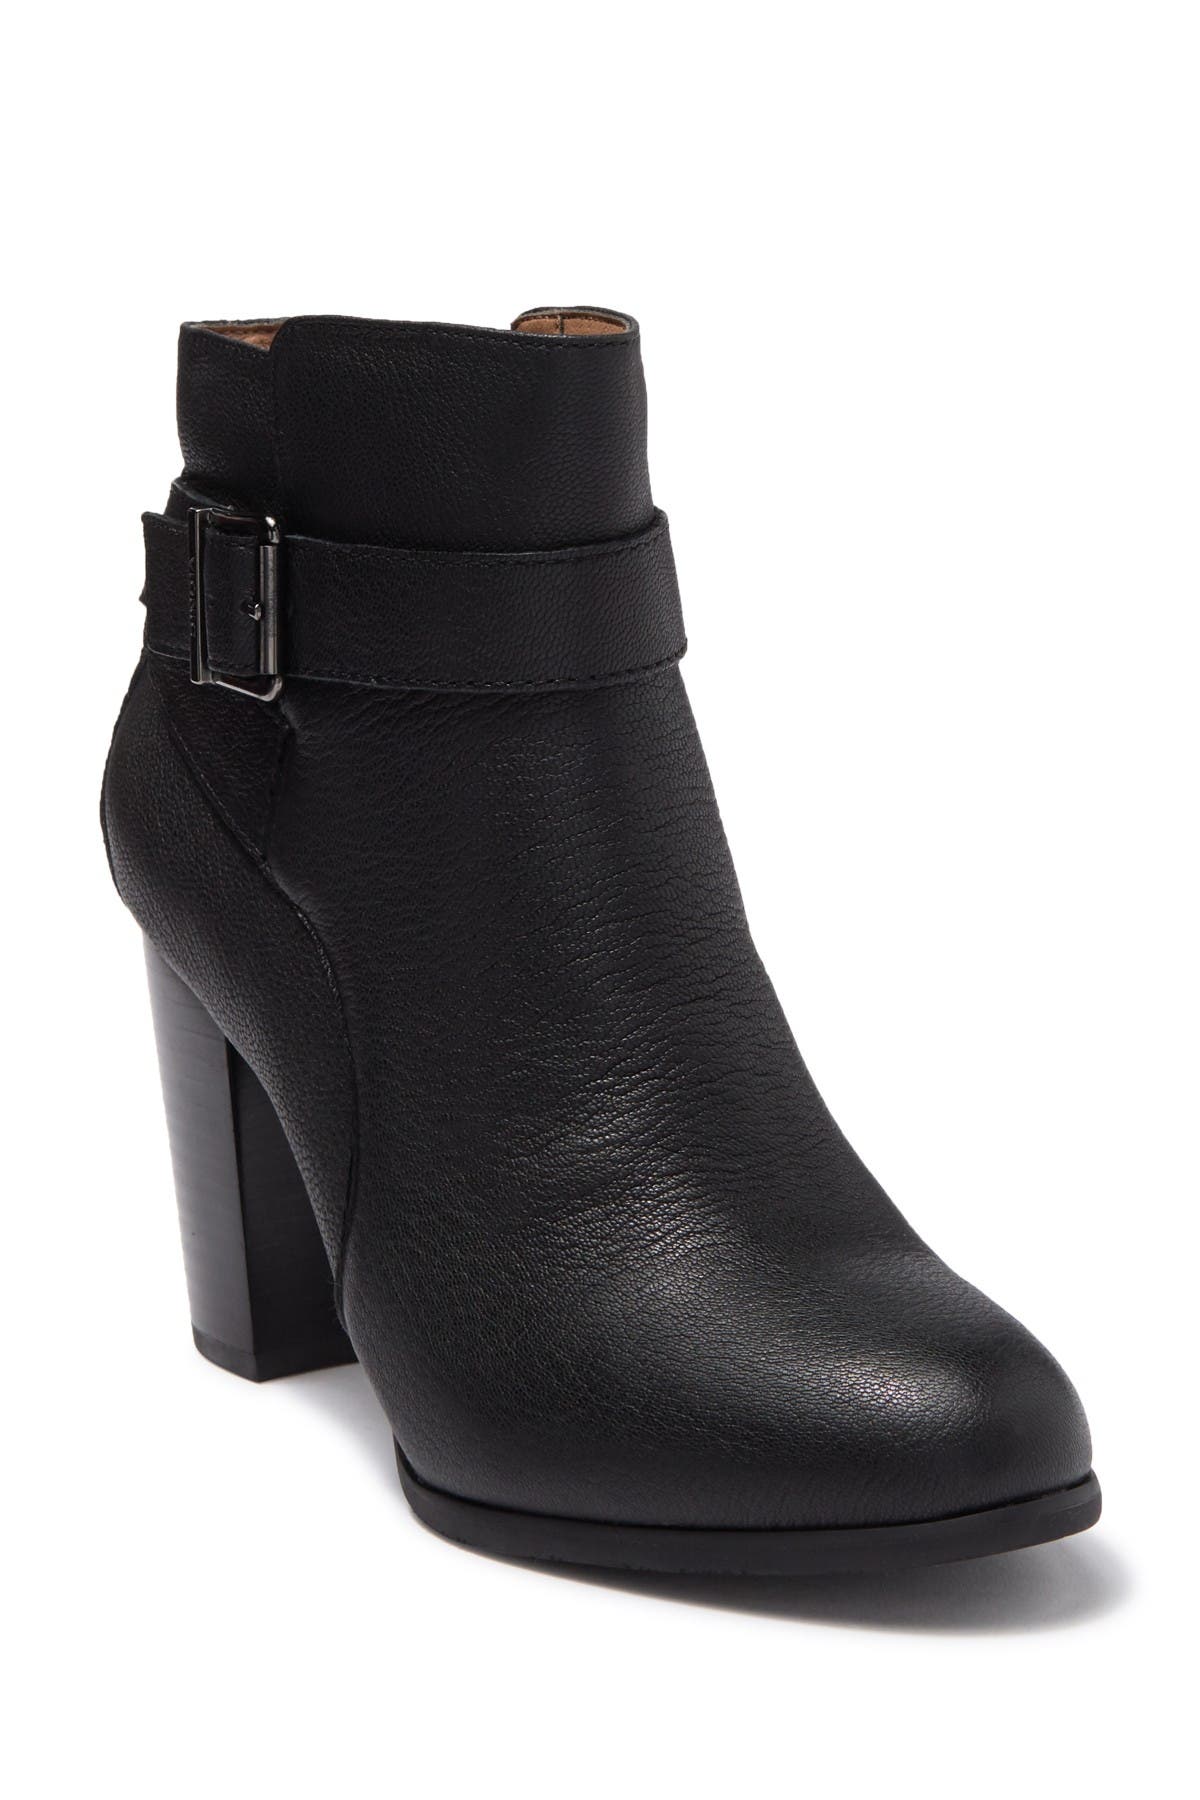 nordstrom rack womens ankle boots